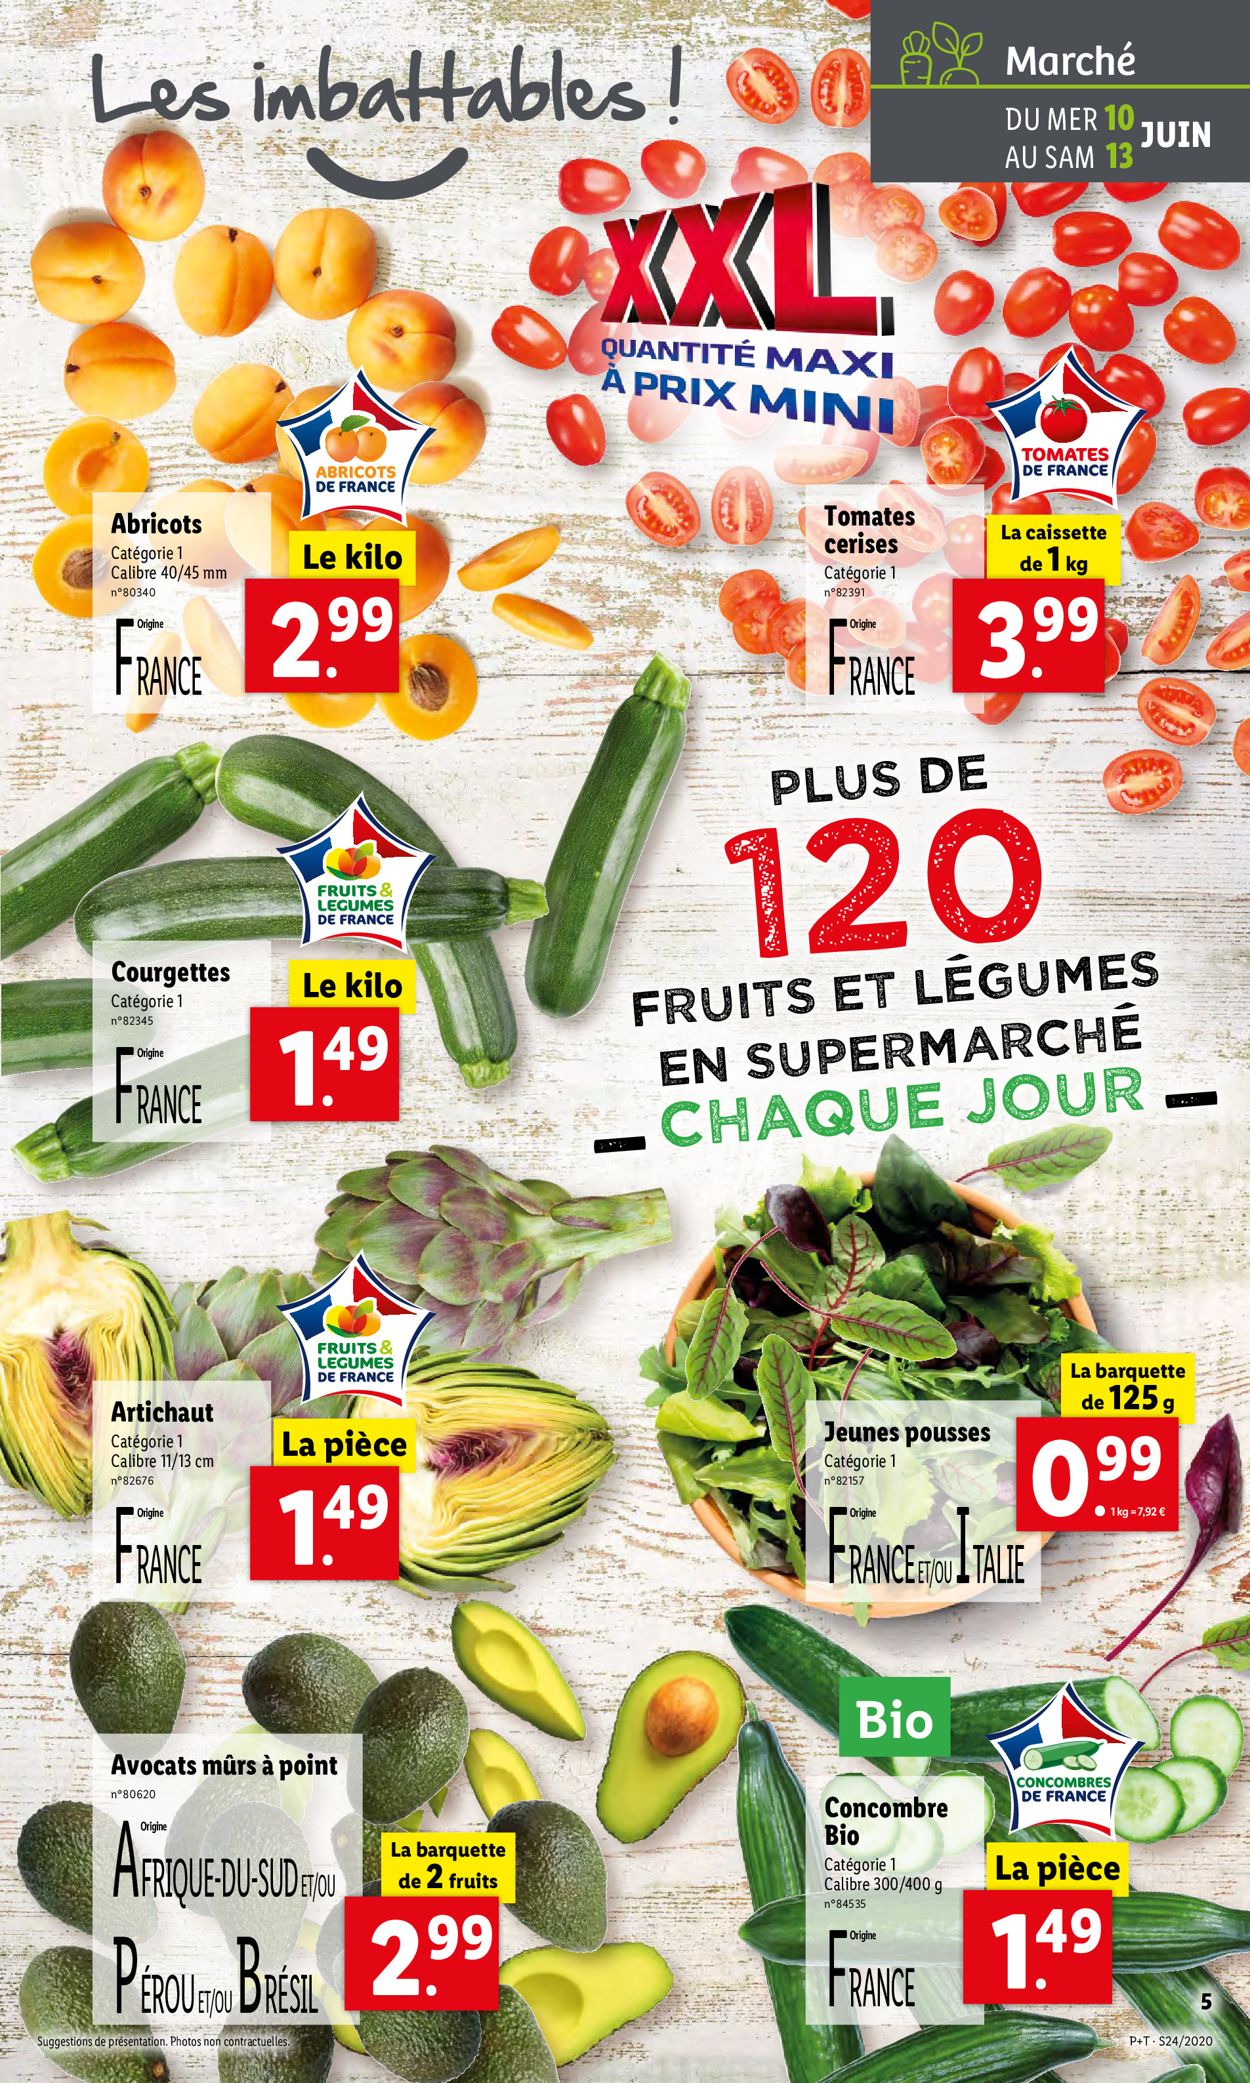 Lidl Catalogue - 10.06-16.06.2020 (Page 7)